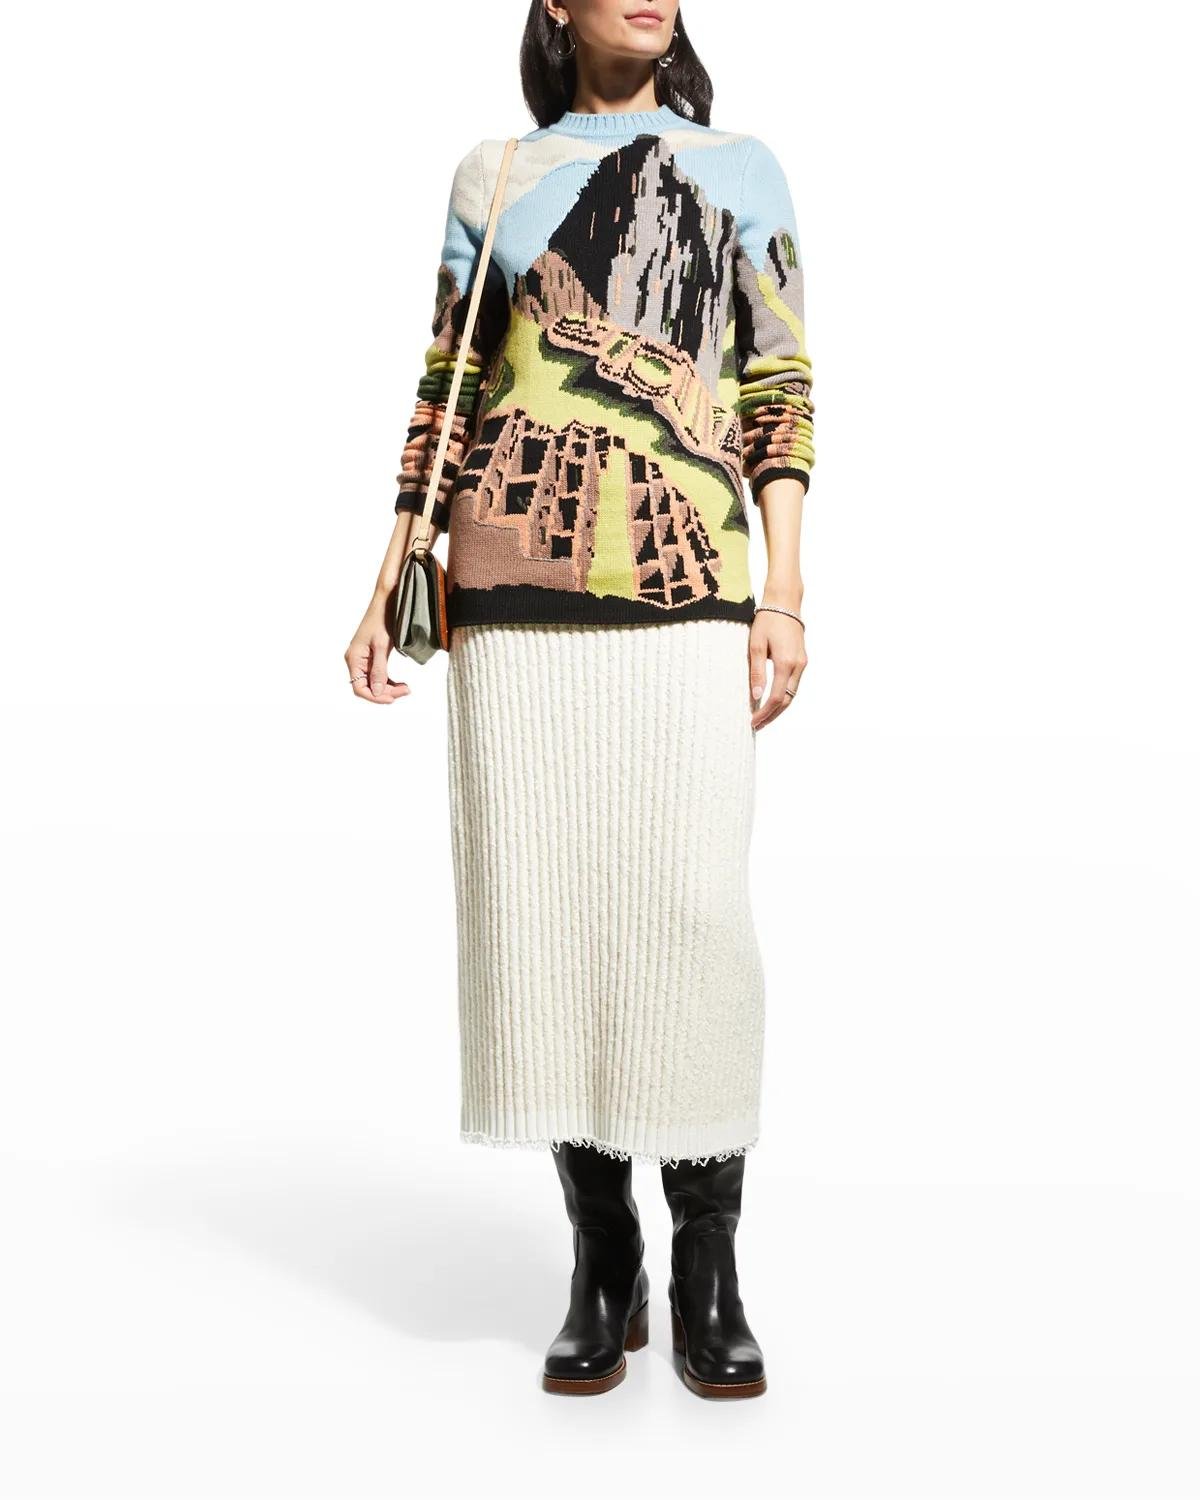 Ines Hand-Embroidered Cashmere Sweater by GABRIELA HEARST